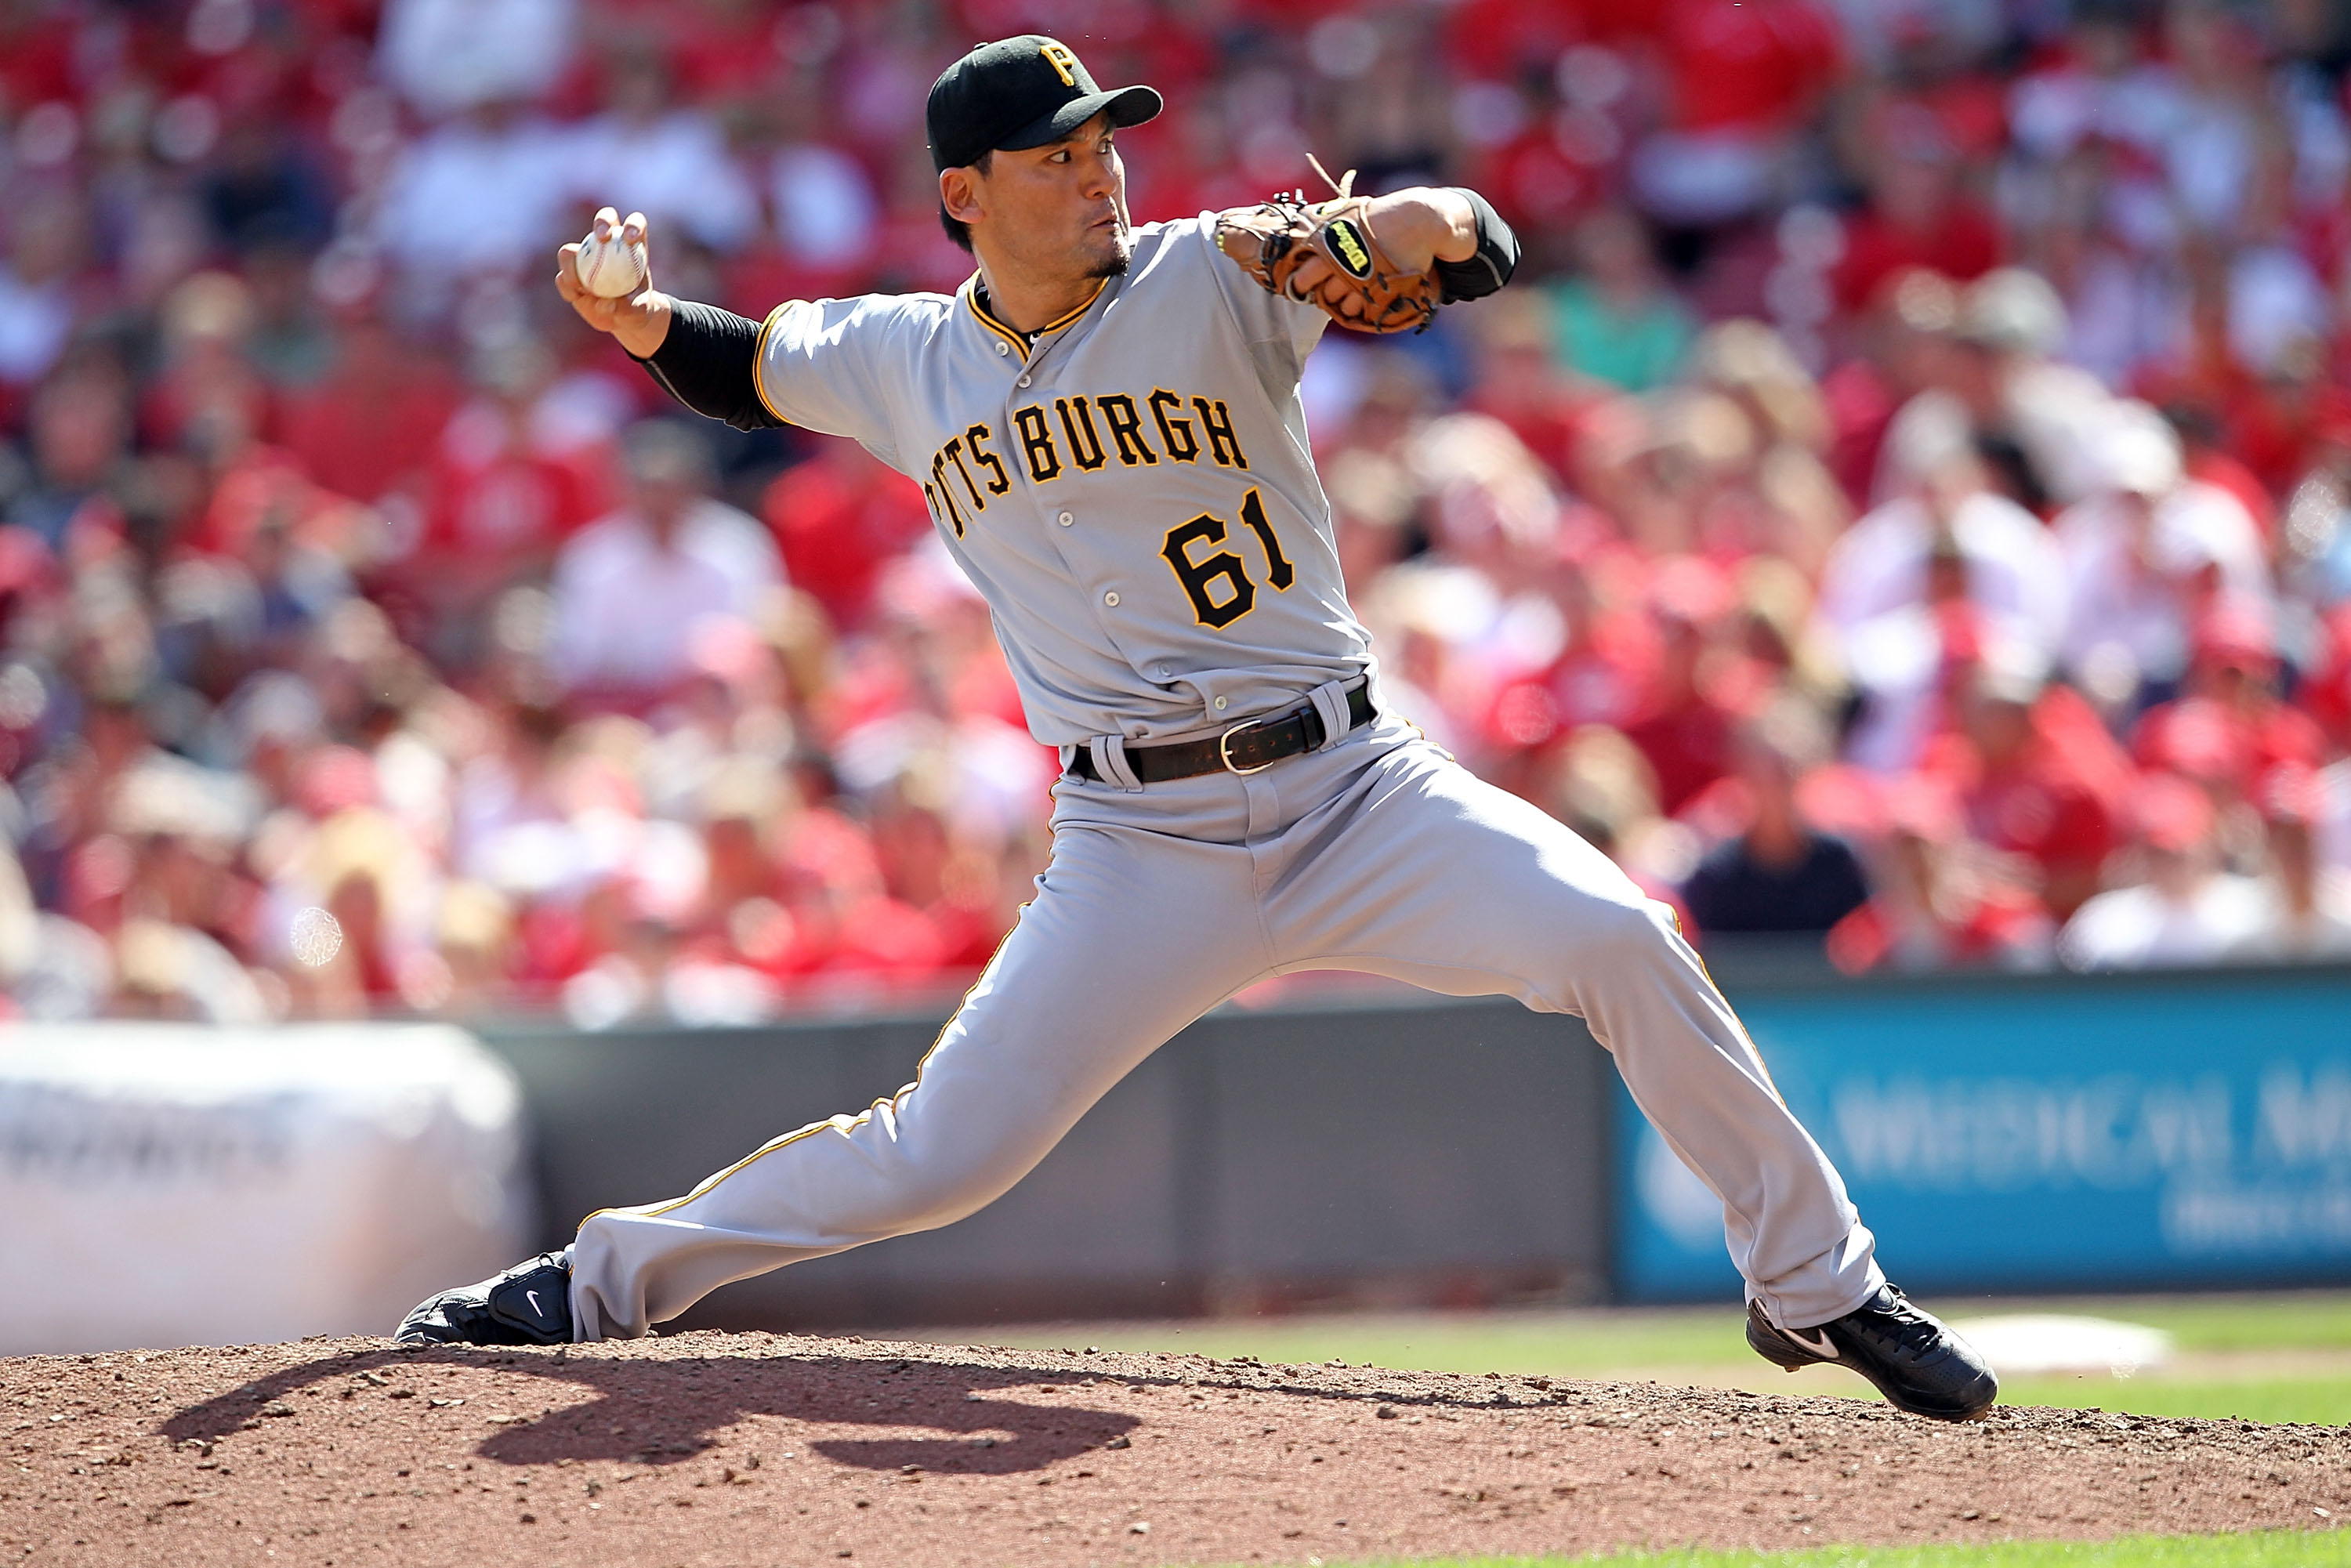 CINCINNATI - SEPTEMBER 12:  Chan Ho Park #61 of the Pittsburgh Pirates throws a pitch during the game against the Cincinnati Reds at Great American Ballpark on September 12, 2010 in Cincinnati, Ohio.  (Photo by Andy Lyons/Getty Images)